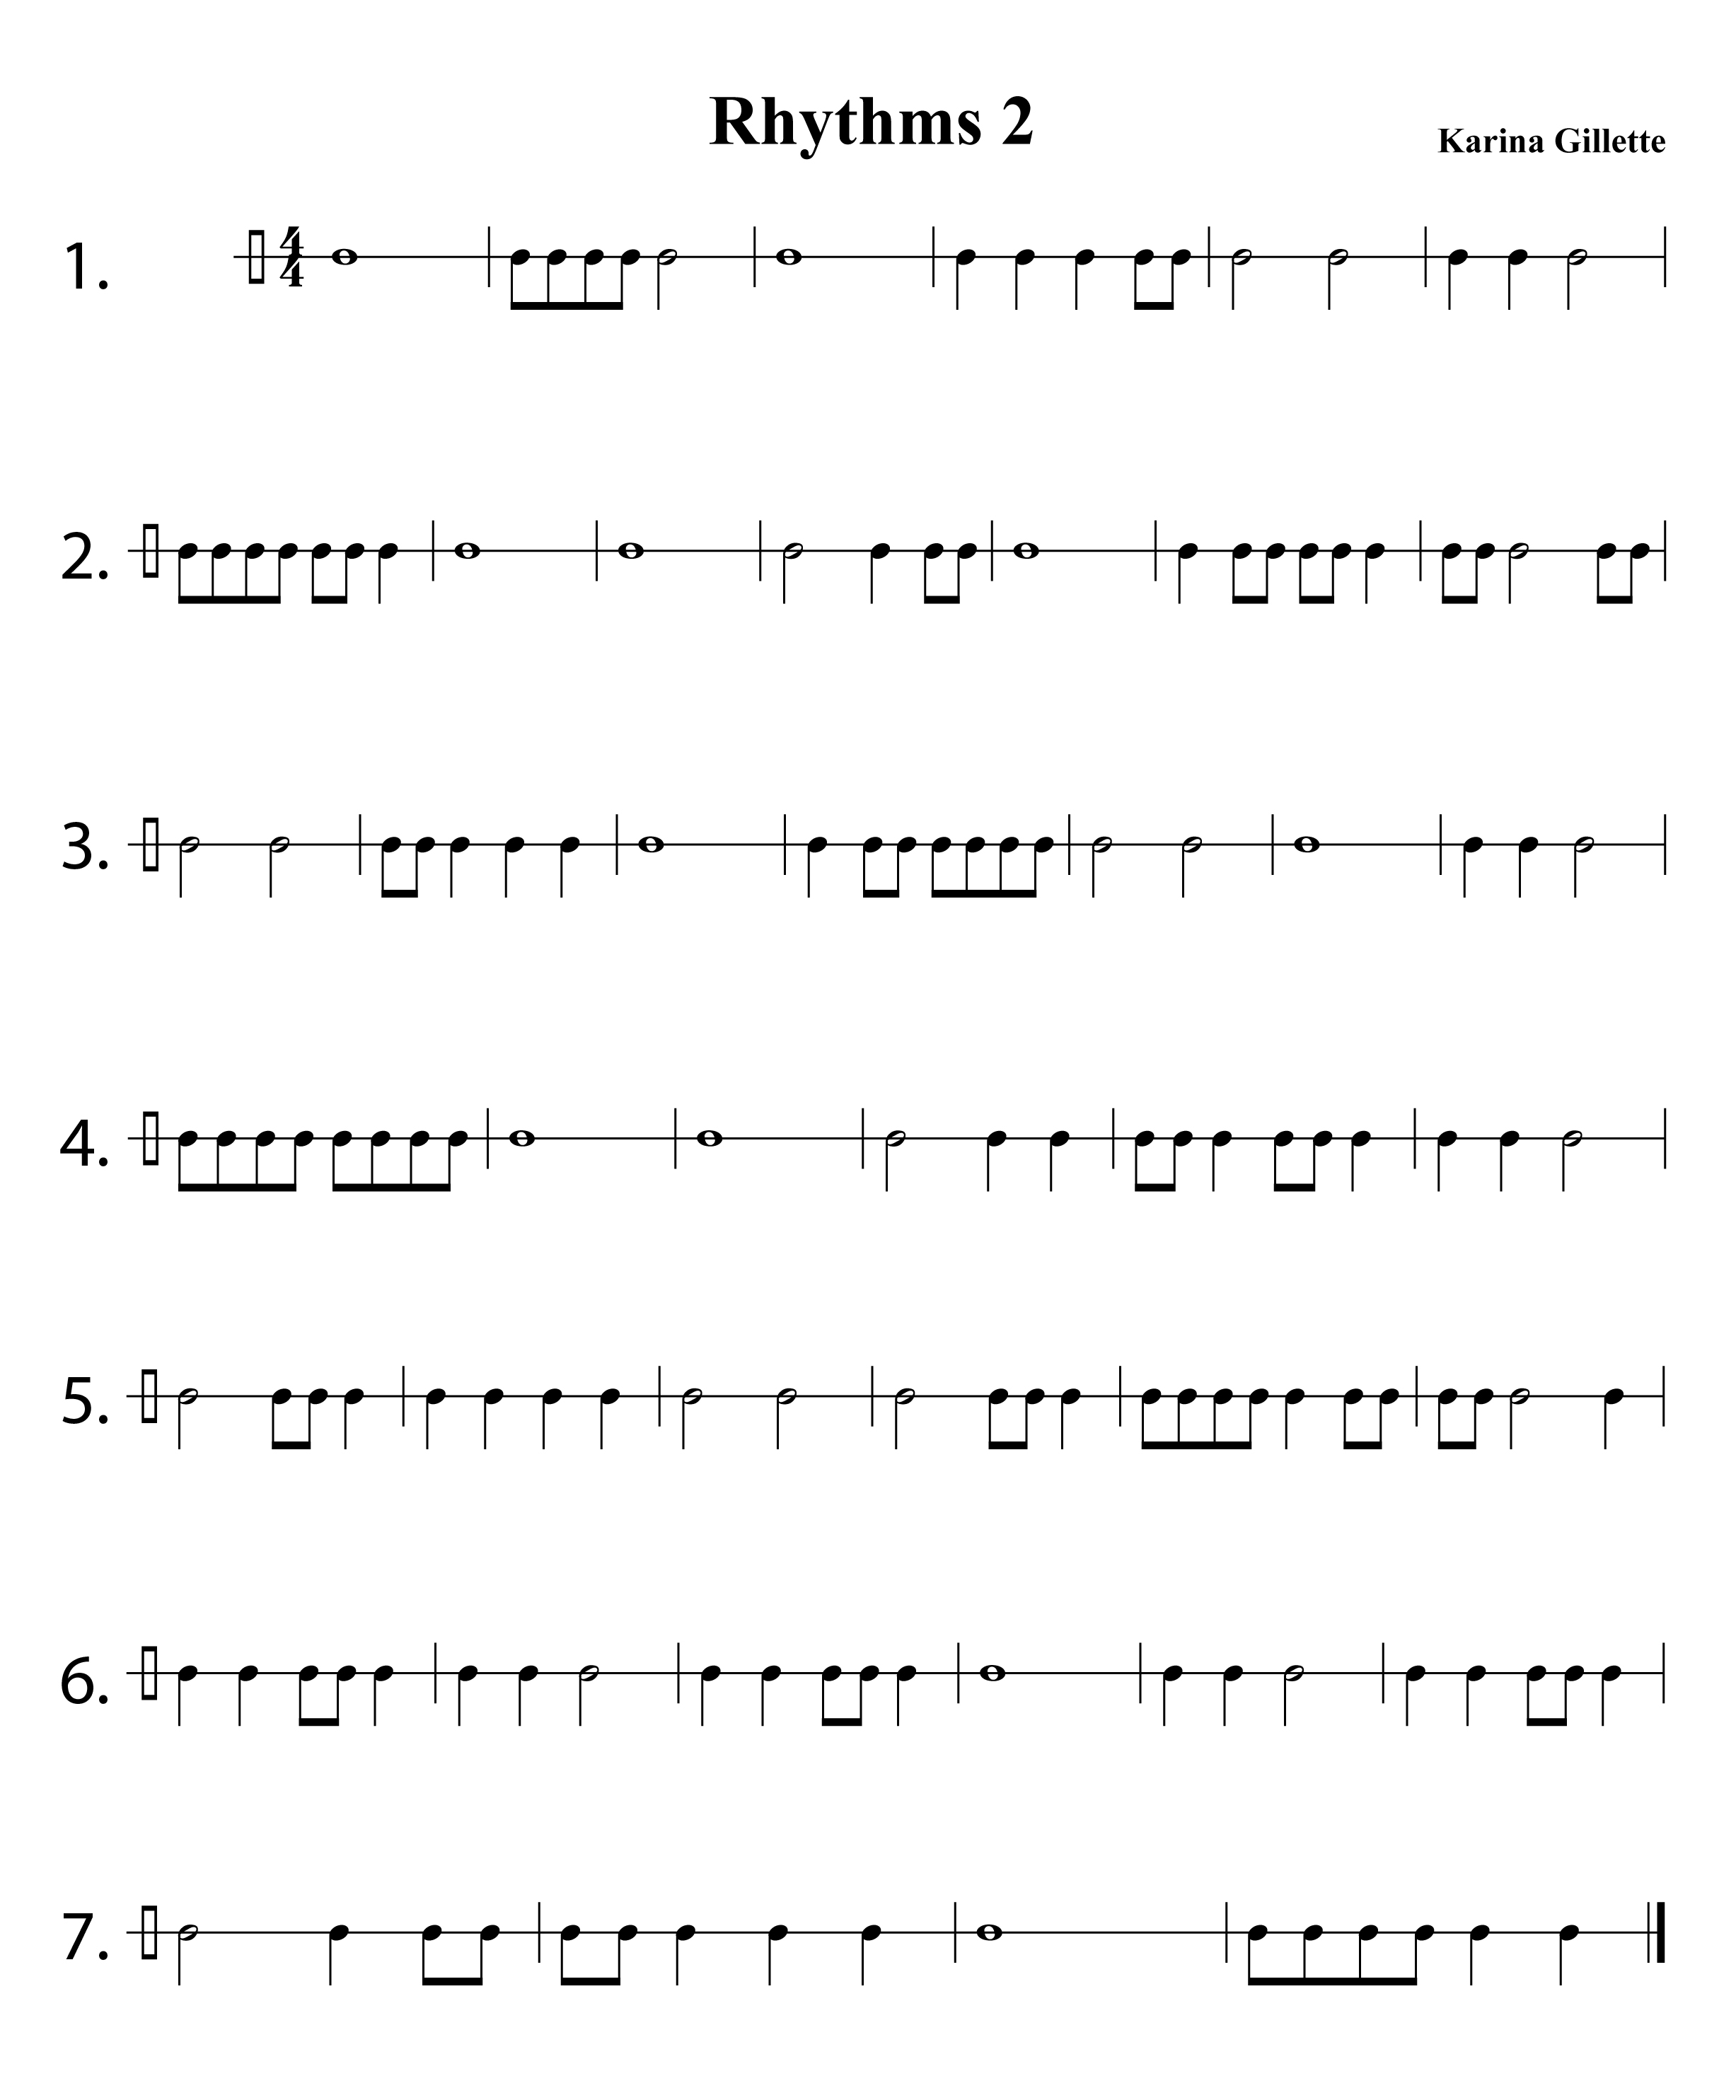 13 Best Images of Printable Music Theory Worksheets - Code Music